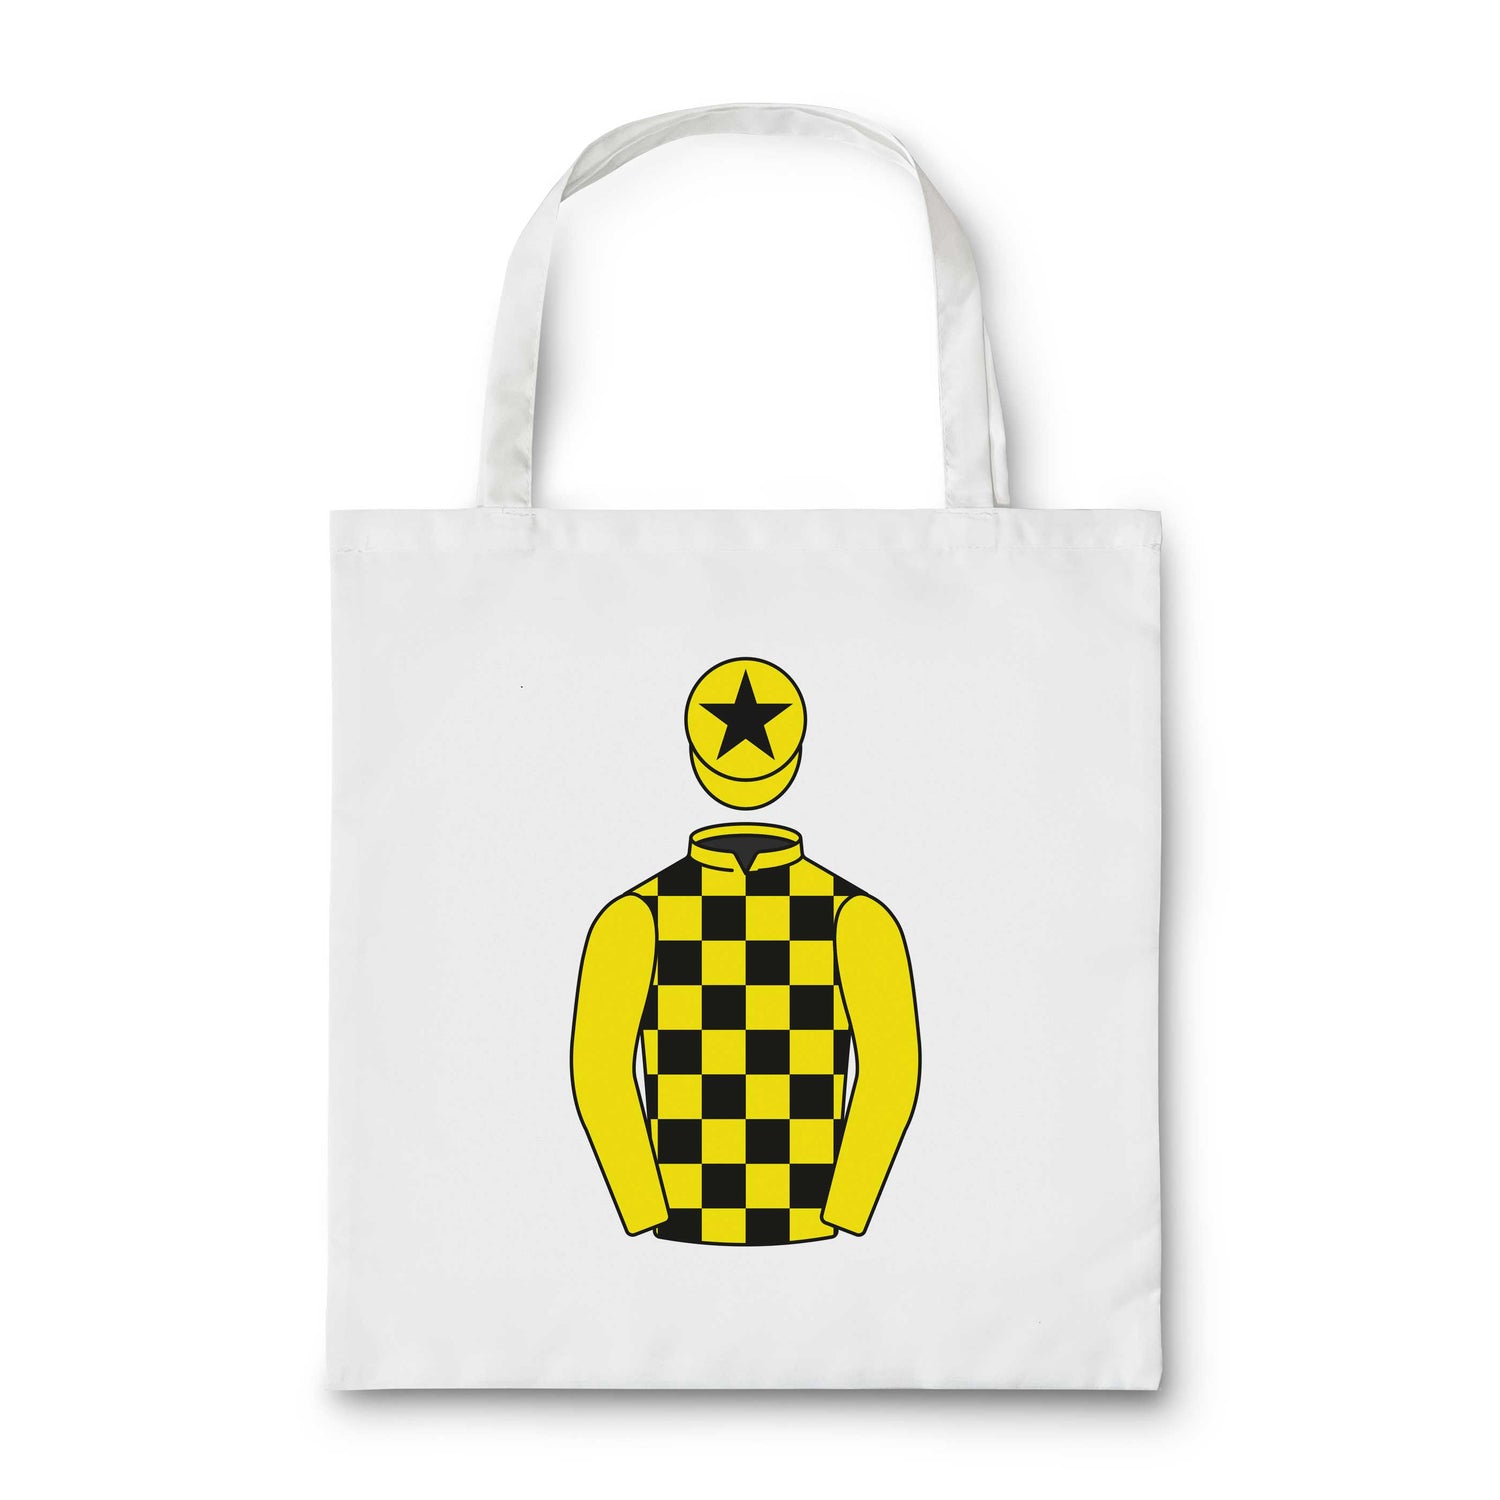 Mrs J Donnelly Tote Bag - Tote Bag - Hacked Up